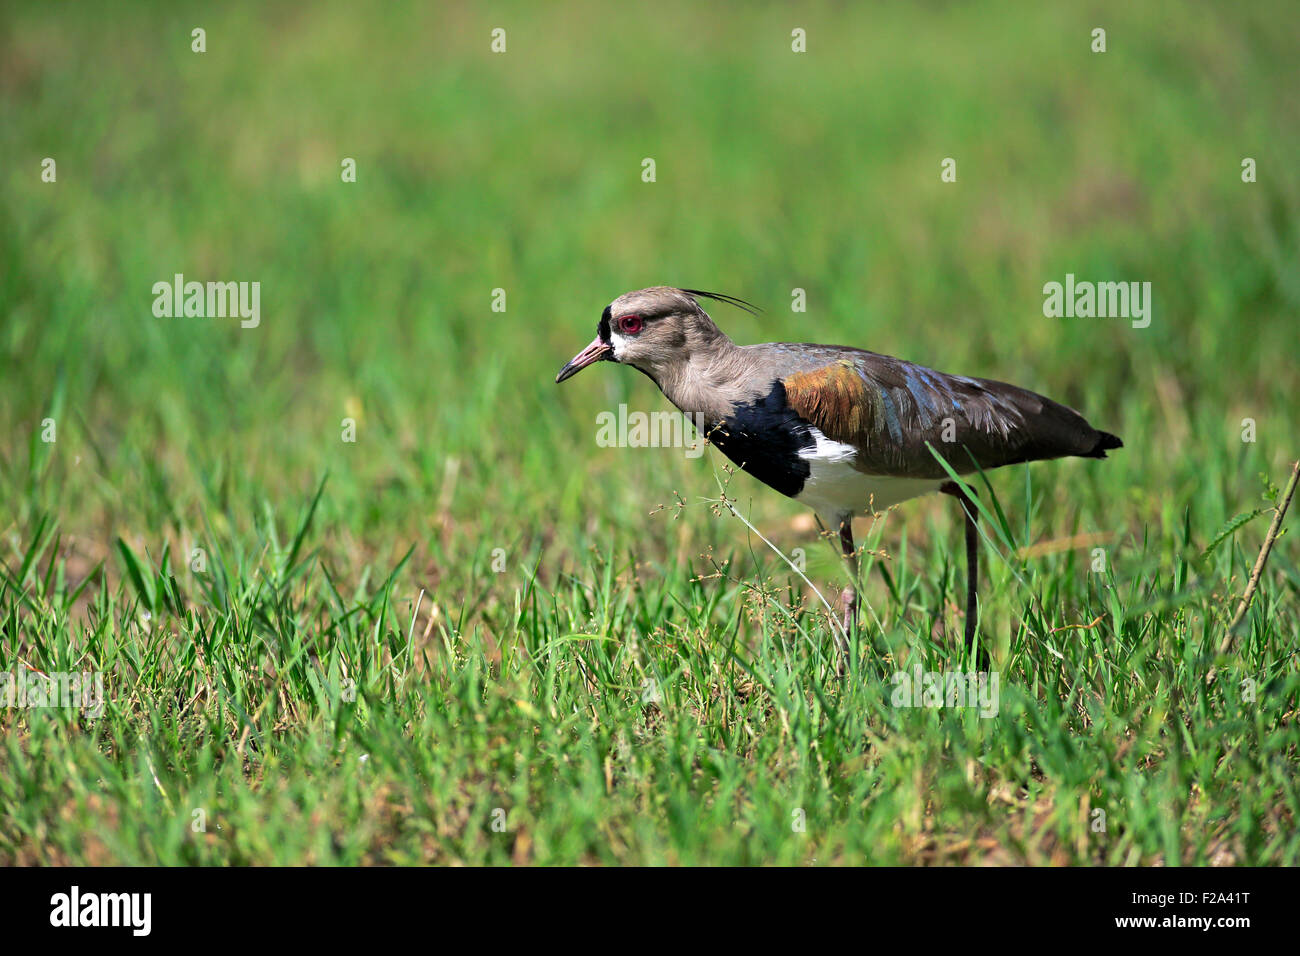 Southern lapwing (Vanellus chilensis), adult foraging, Pantanal, Mato Grosso, Brazil Stock Photo